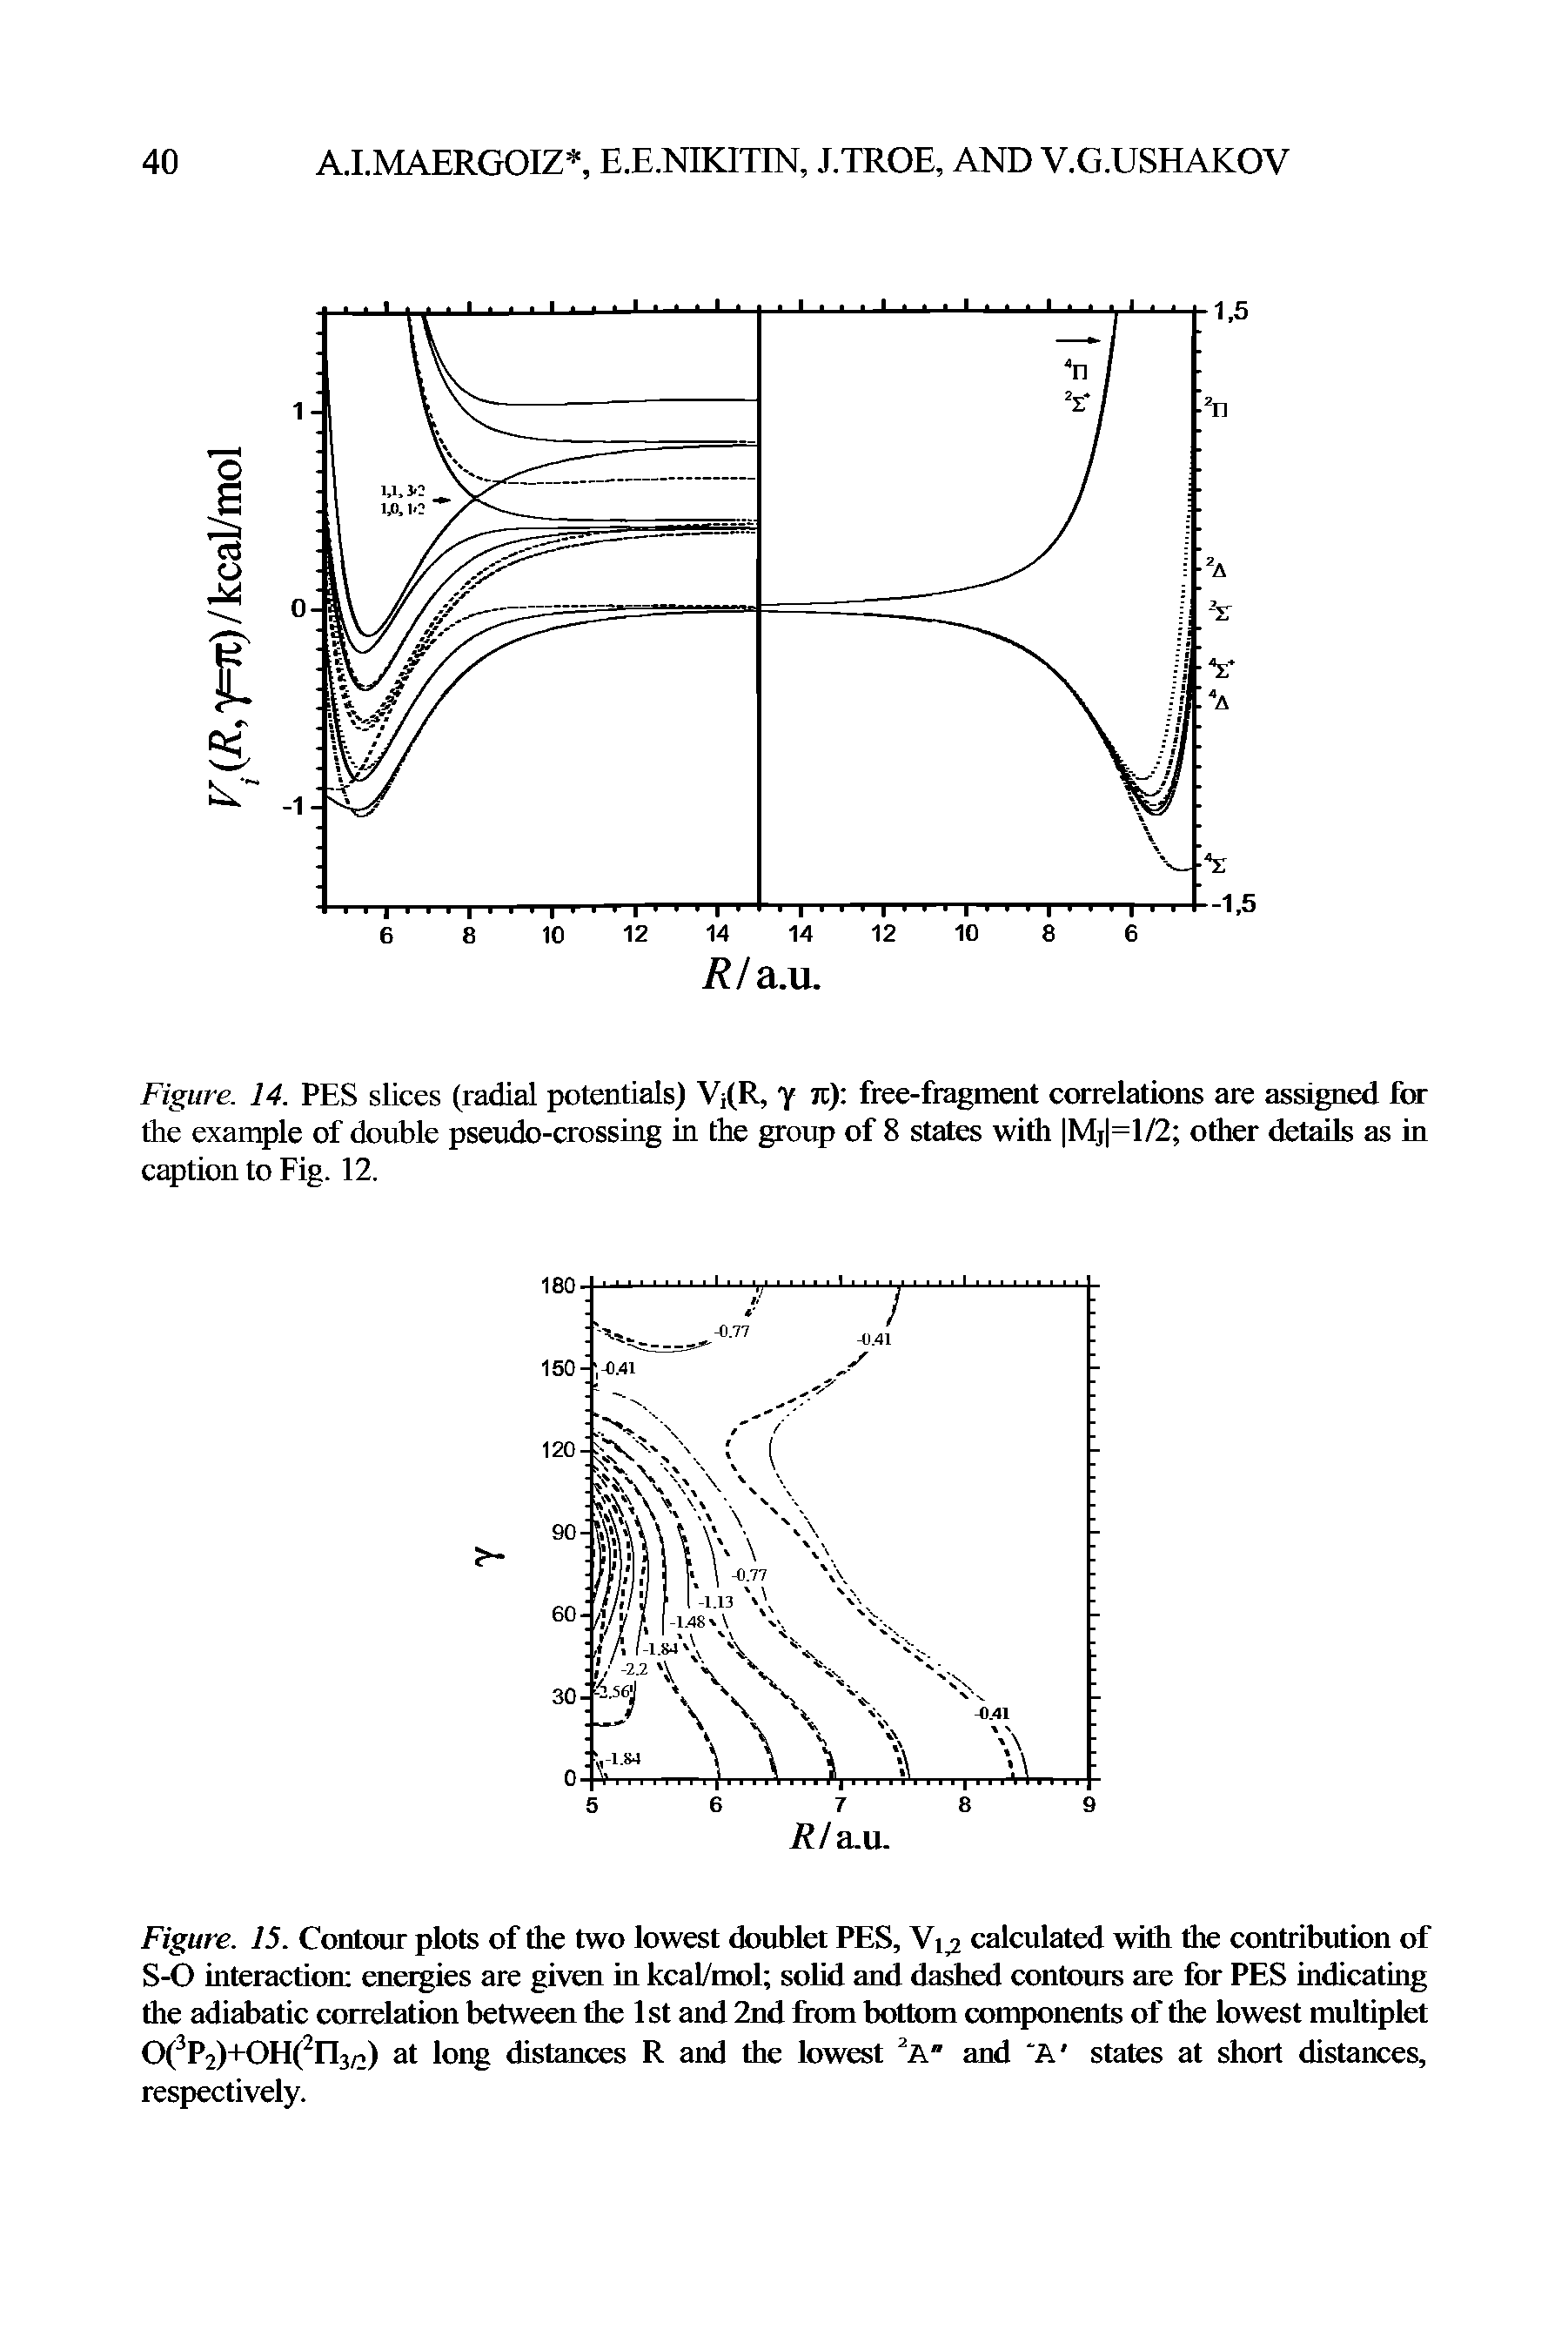 Figure. 15. Contour plots of the two lowest doublet PES, Vi 2 calculated with the contribution of S-O interaction energies are given in kcaPmol solid and dashed contours are for PES indicating the adiabatic correlation between the 1st and 2nd from bottom components of the lowest multiplet 0( P2)+0H( ri3/2) at long distances R and the lowest A" and A states at short distances, respectively.